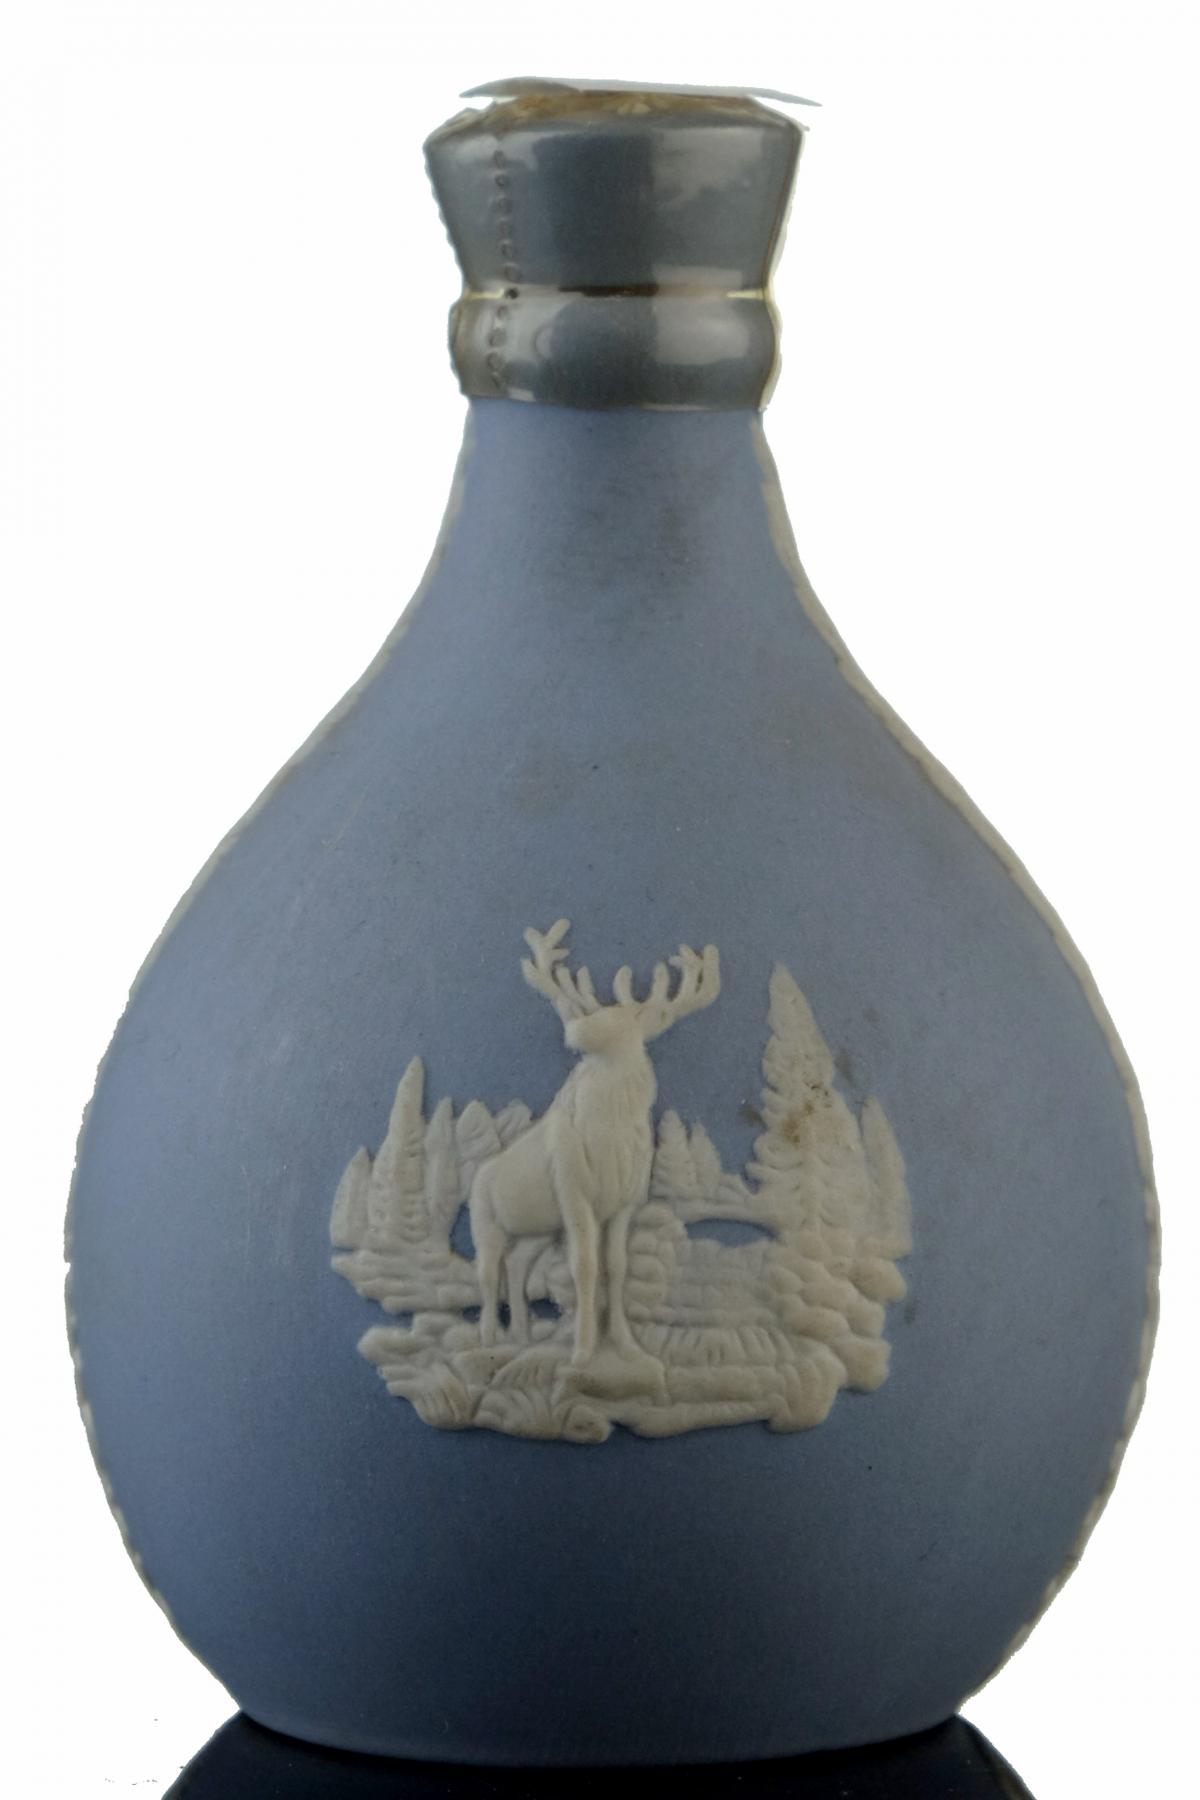 Glenfiddich 21 Year Old - Wedgwood Decanter Miniature